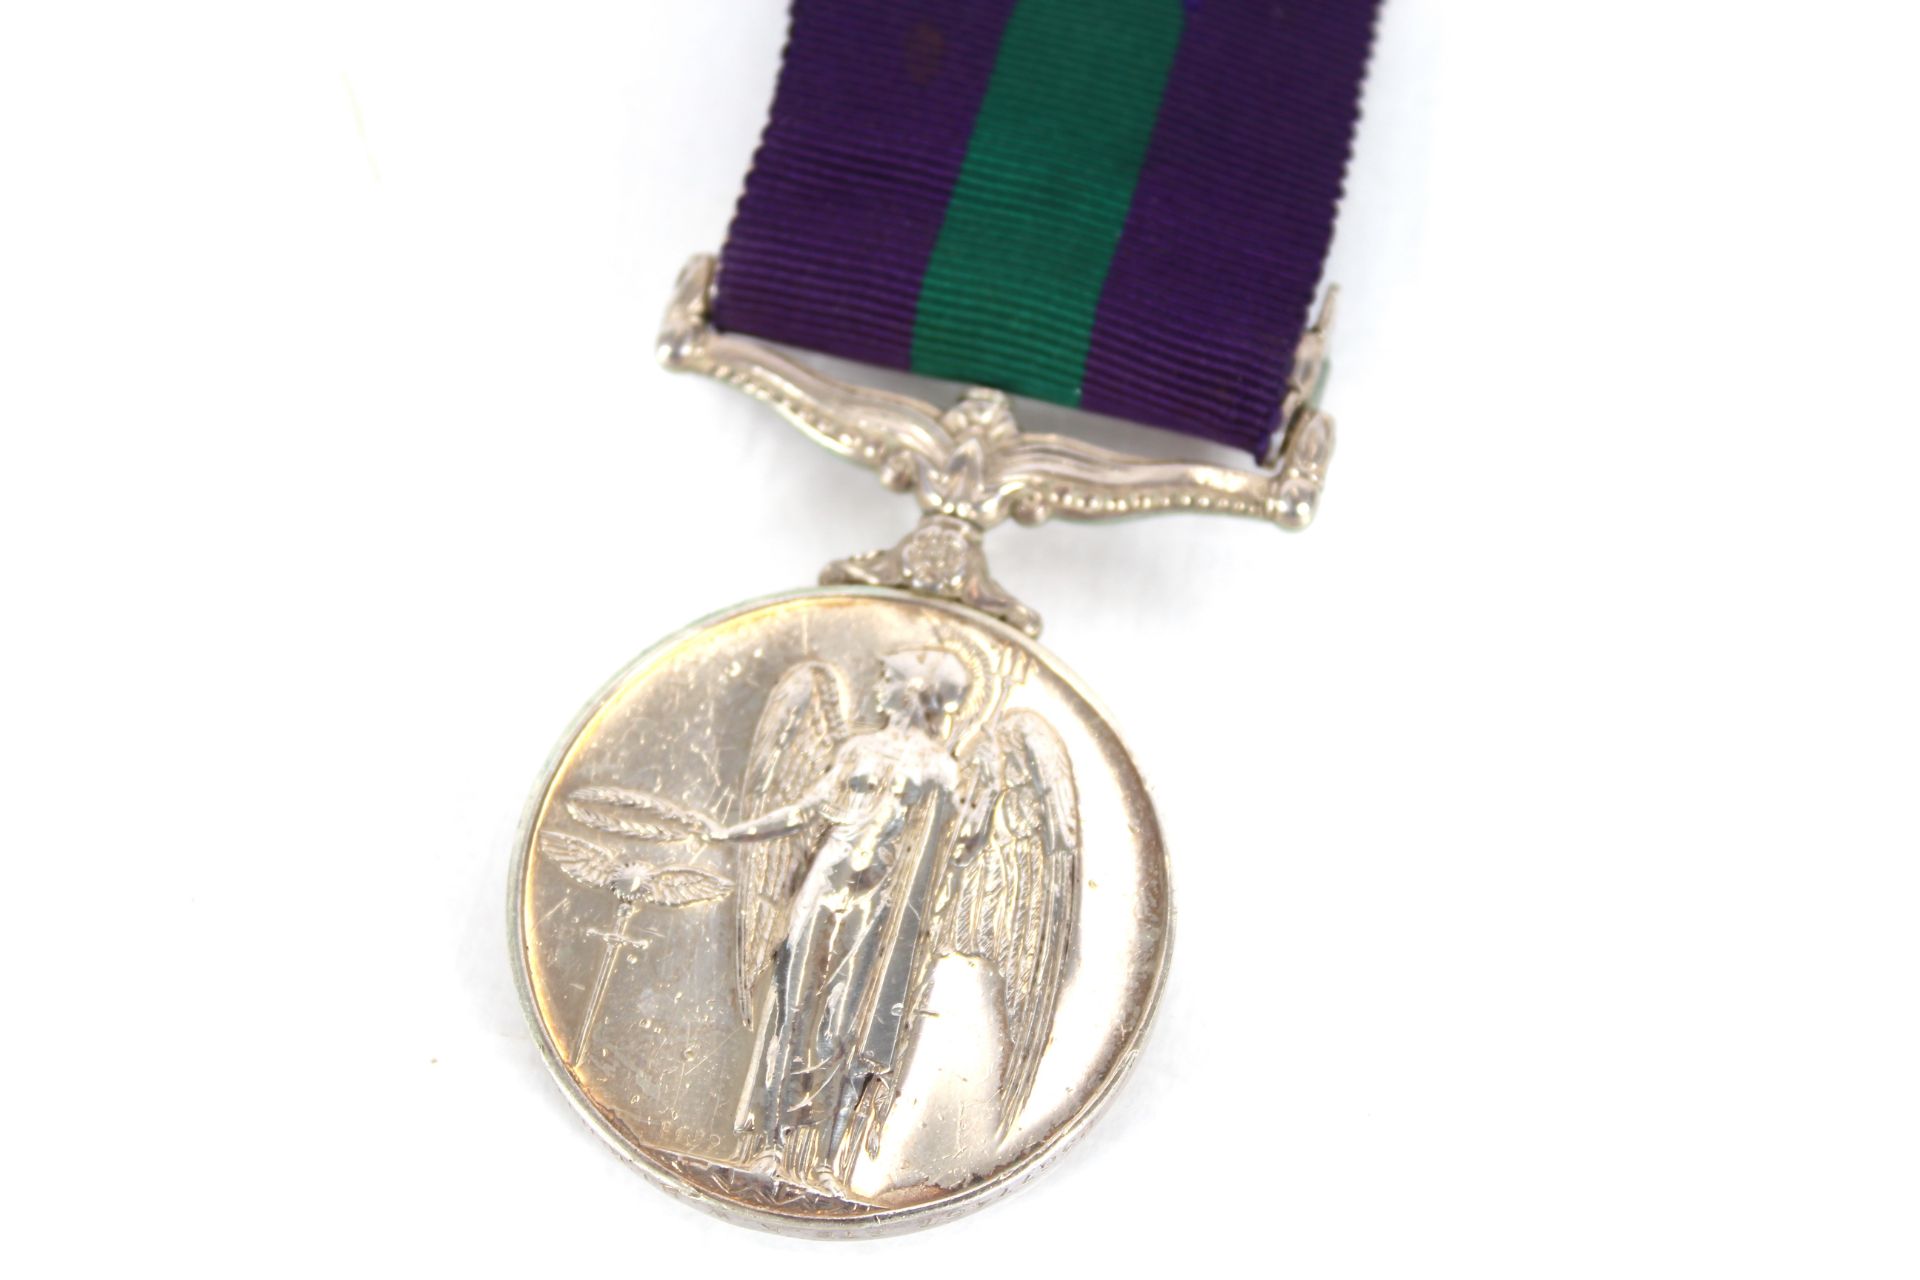 A QEII G.S.M. with Malaya clasp to 23677467 Pte. K - Image 2 of 4